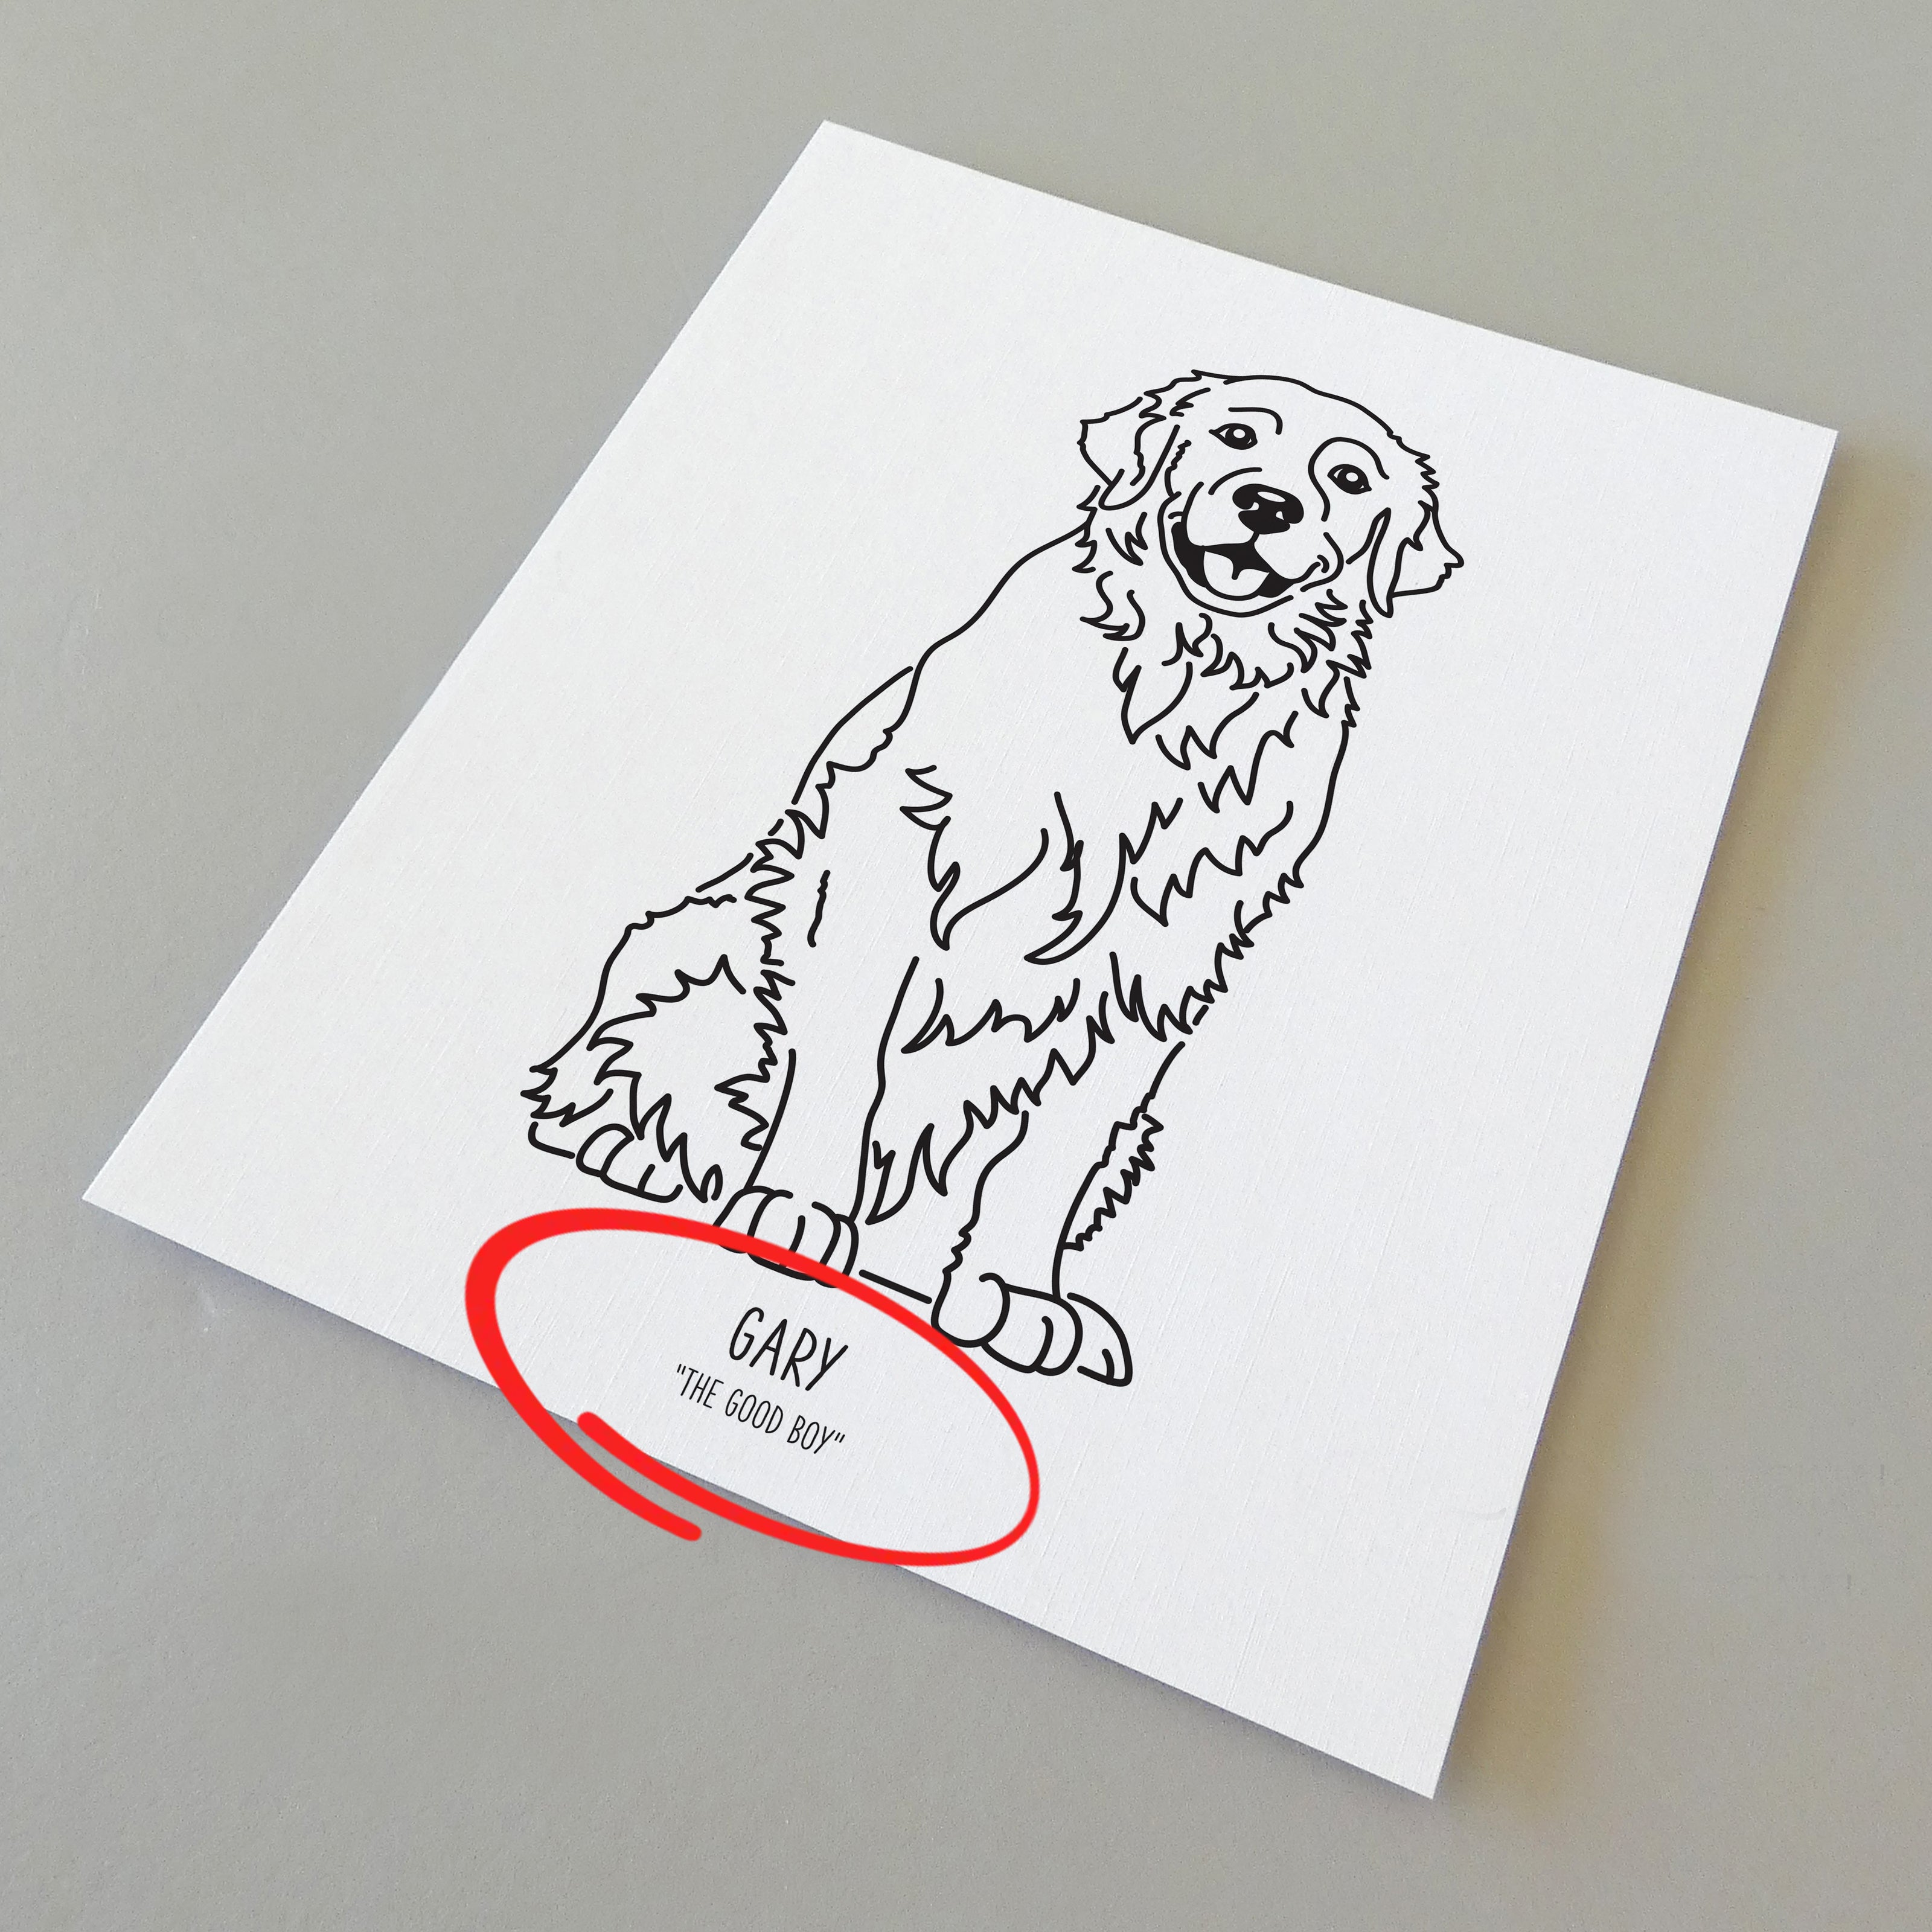 A line drawing of a golden retriever with a custom title